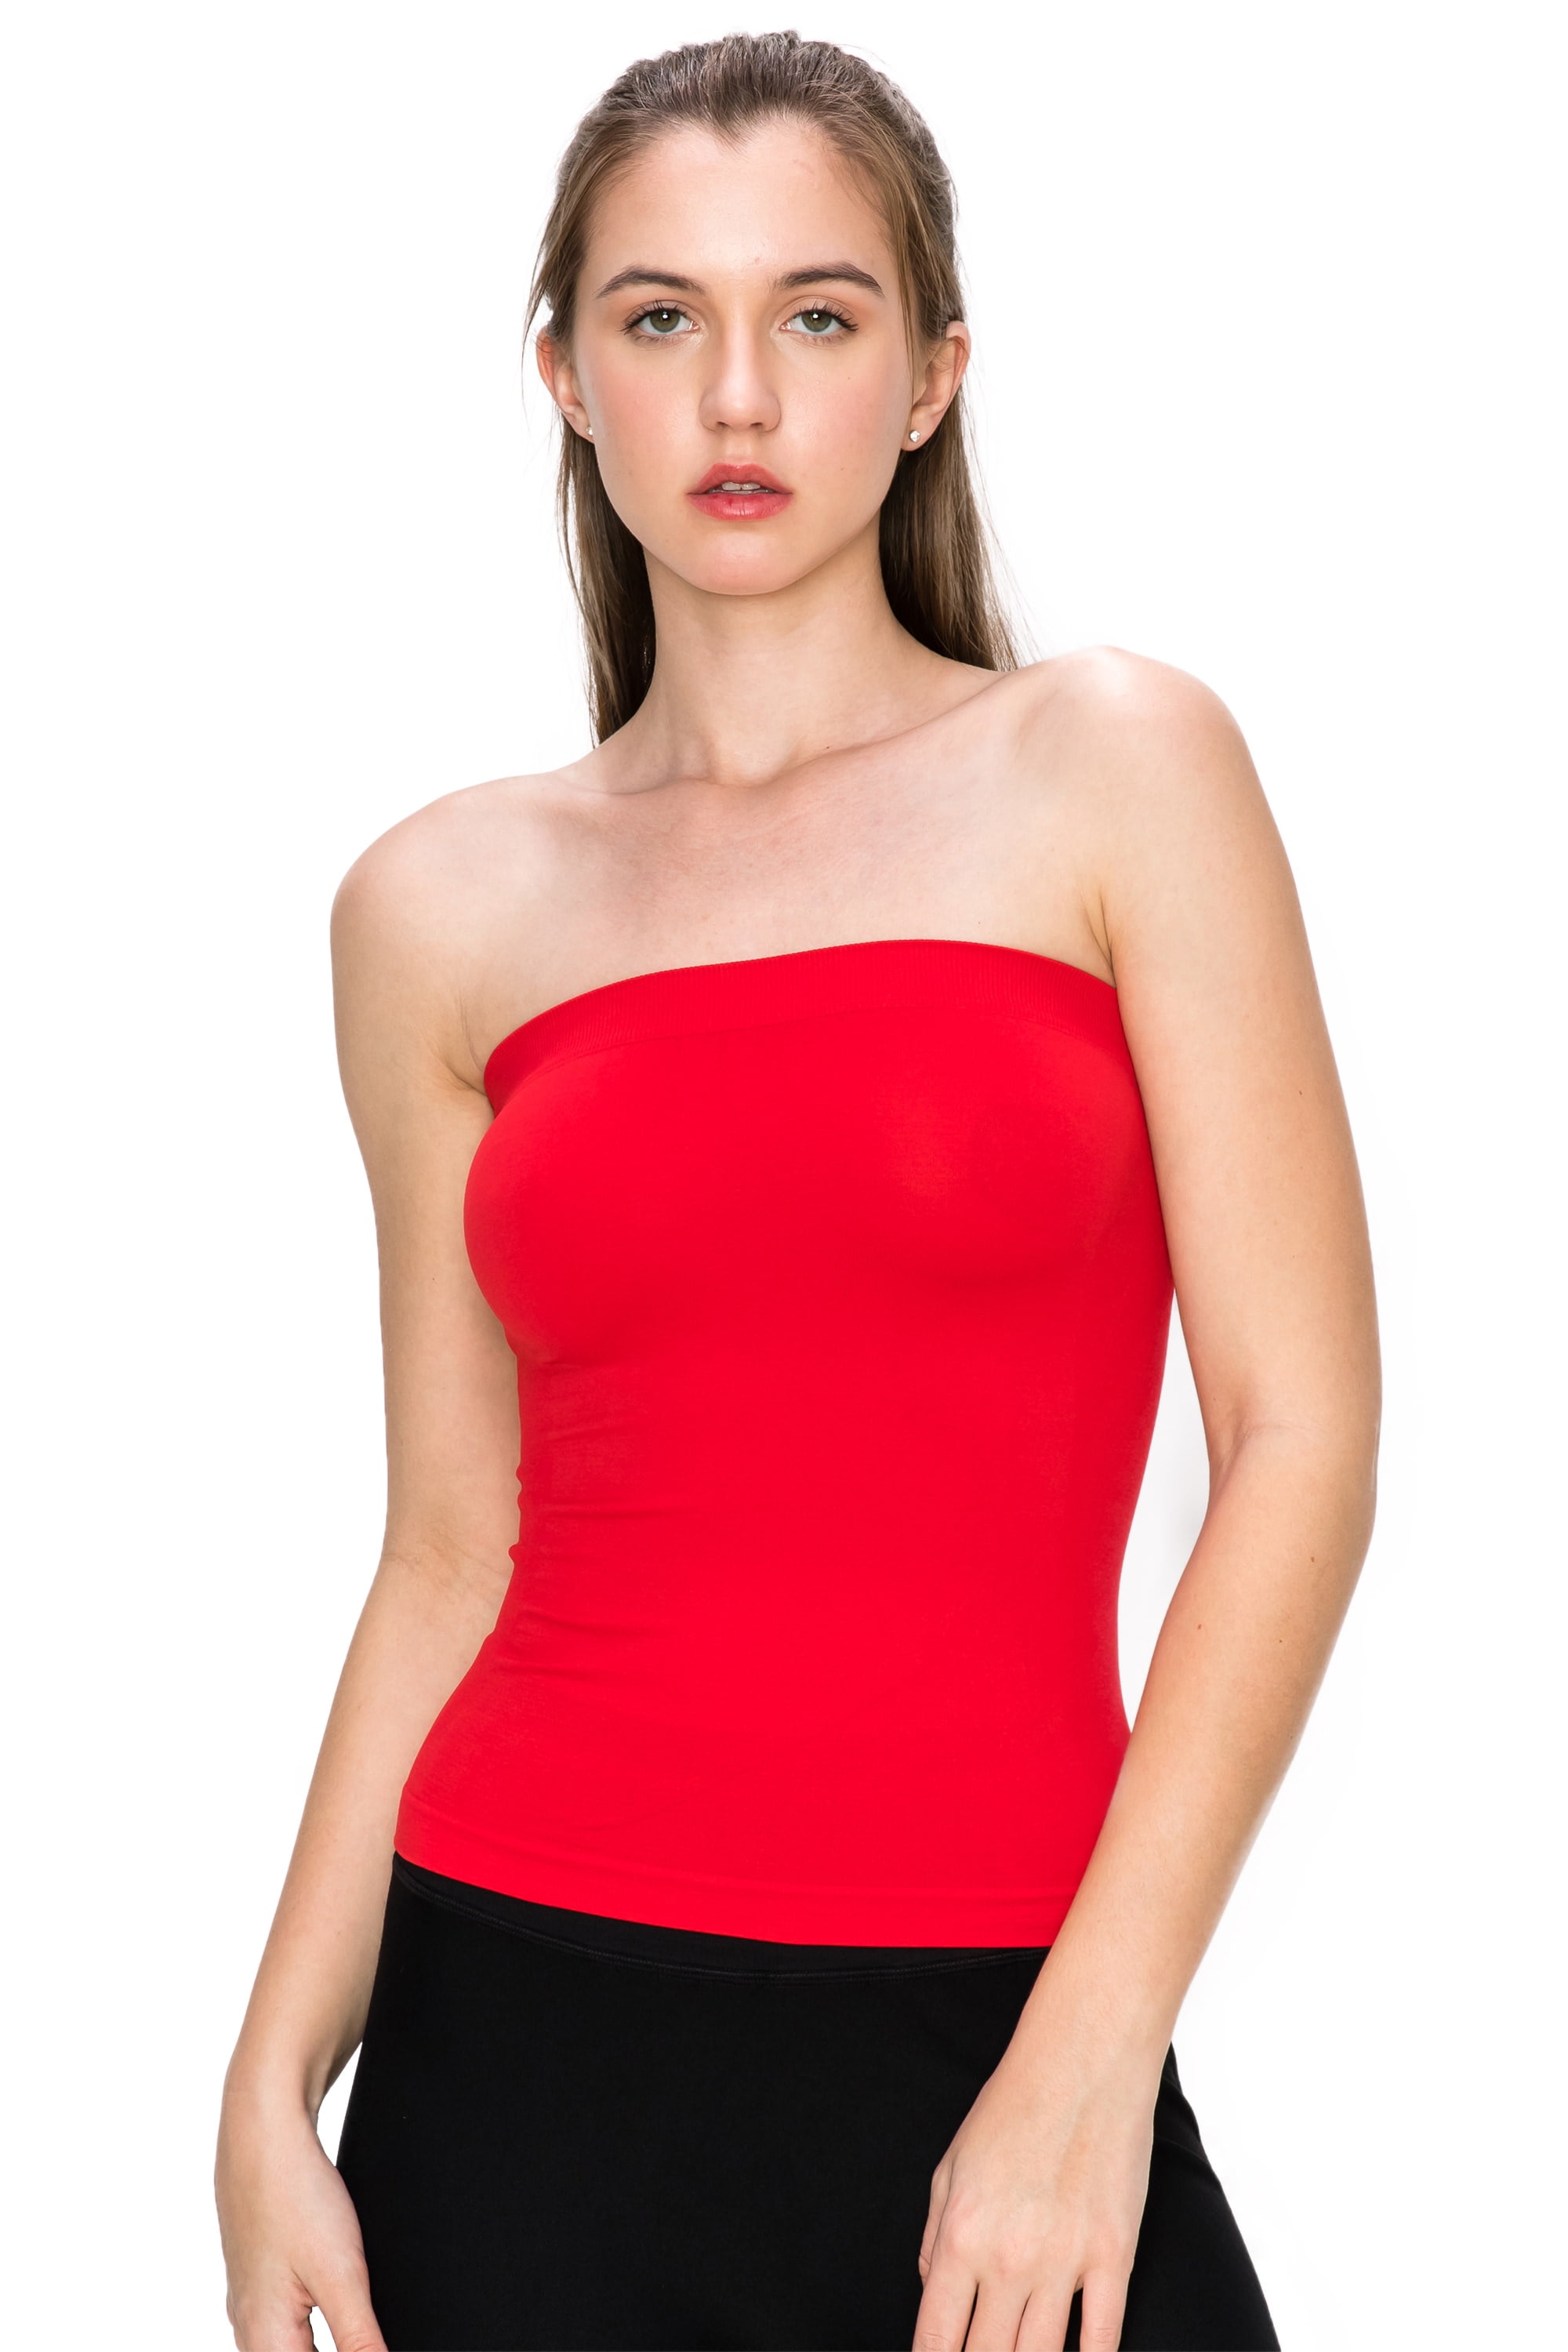 Kurve Medium Length Tube Top with Built-in Shelf Bra UV Protective Fabric UPF 50+ Made with Love in The USA 